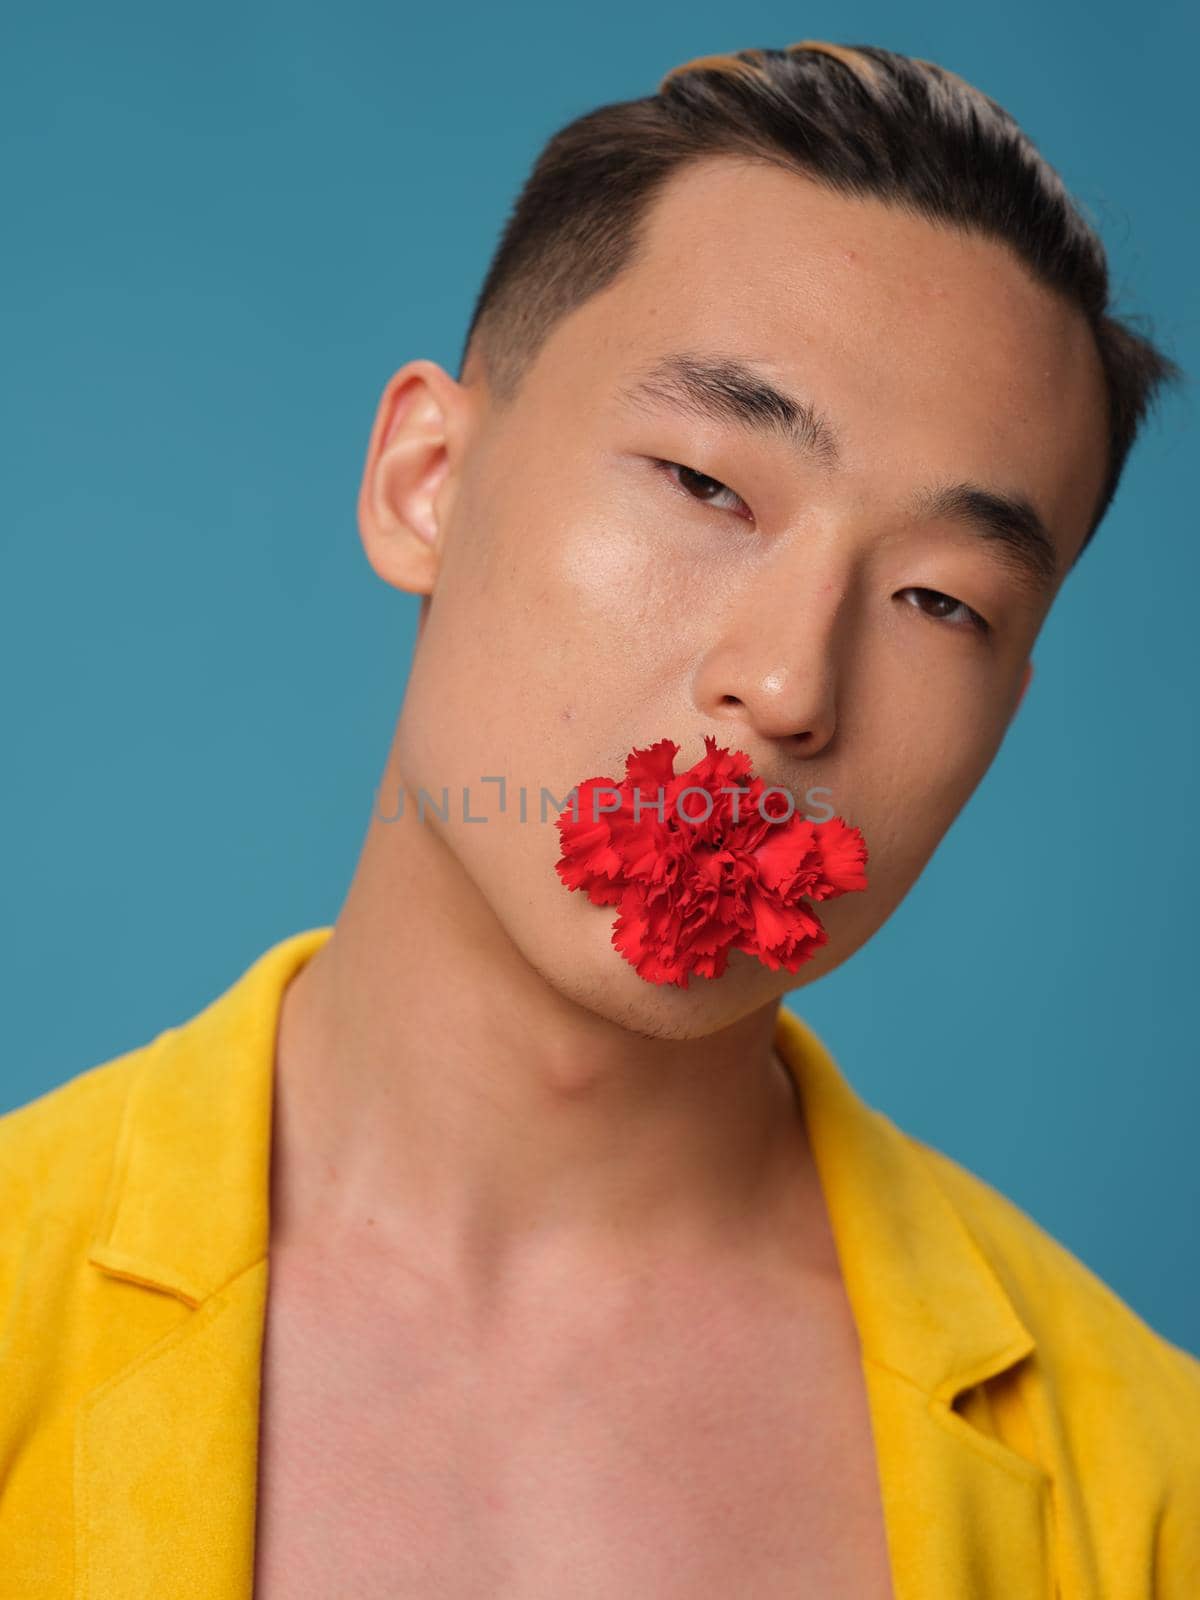 Portrait of a Korean man with a red flower in his mouth and a yellow jacket by SHOTPRIME